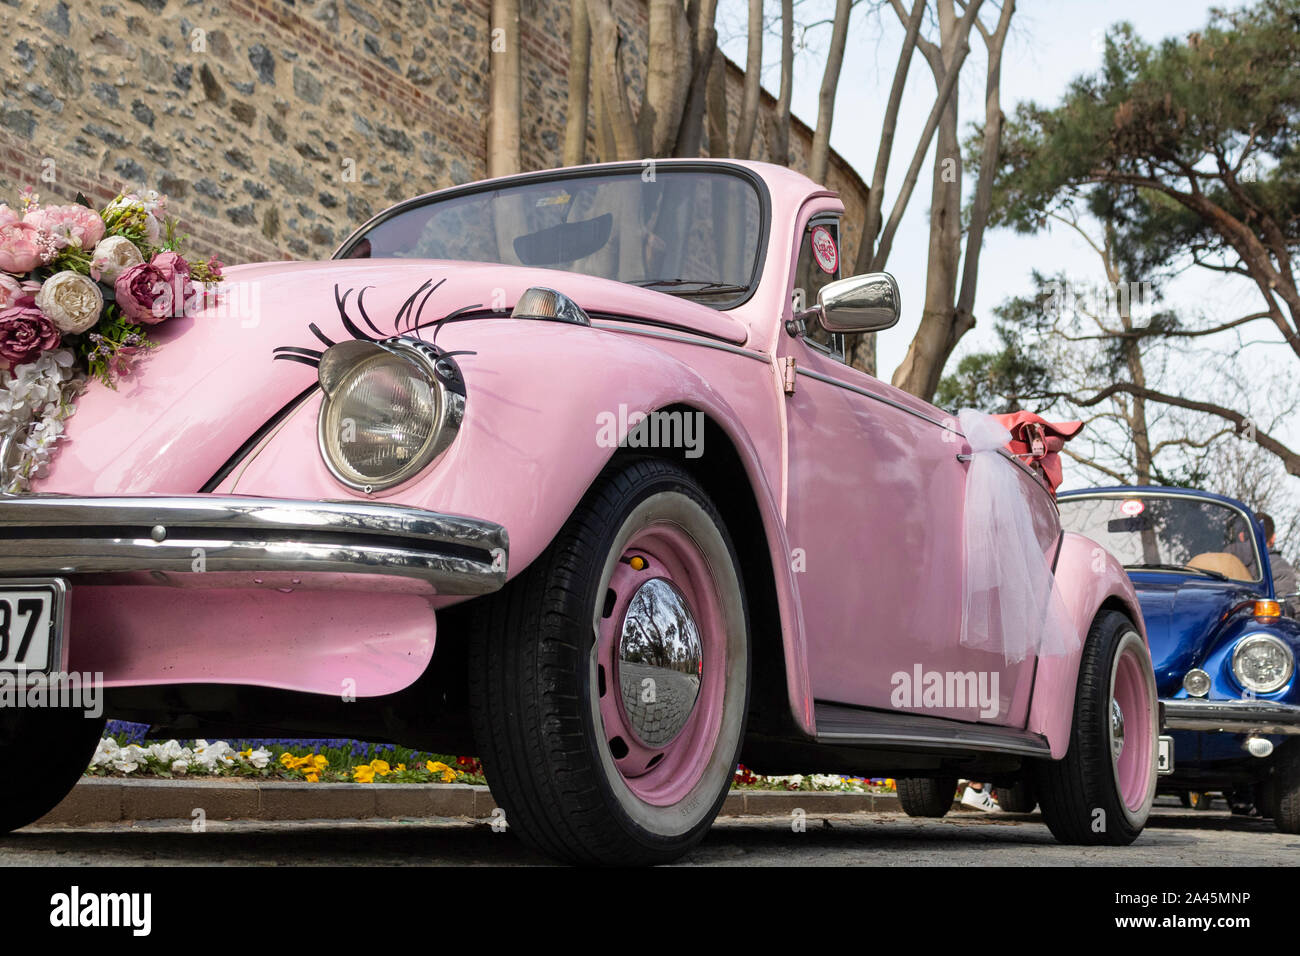 Pink classic car and sticky eyelashes in the headlight Stock Photo